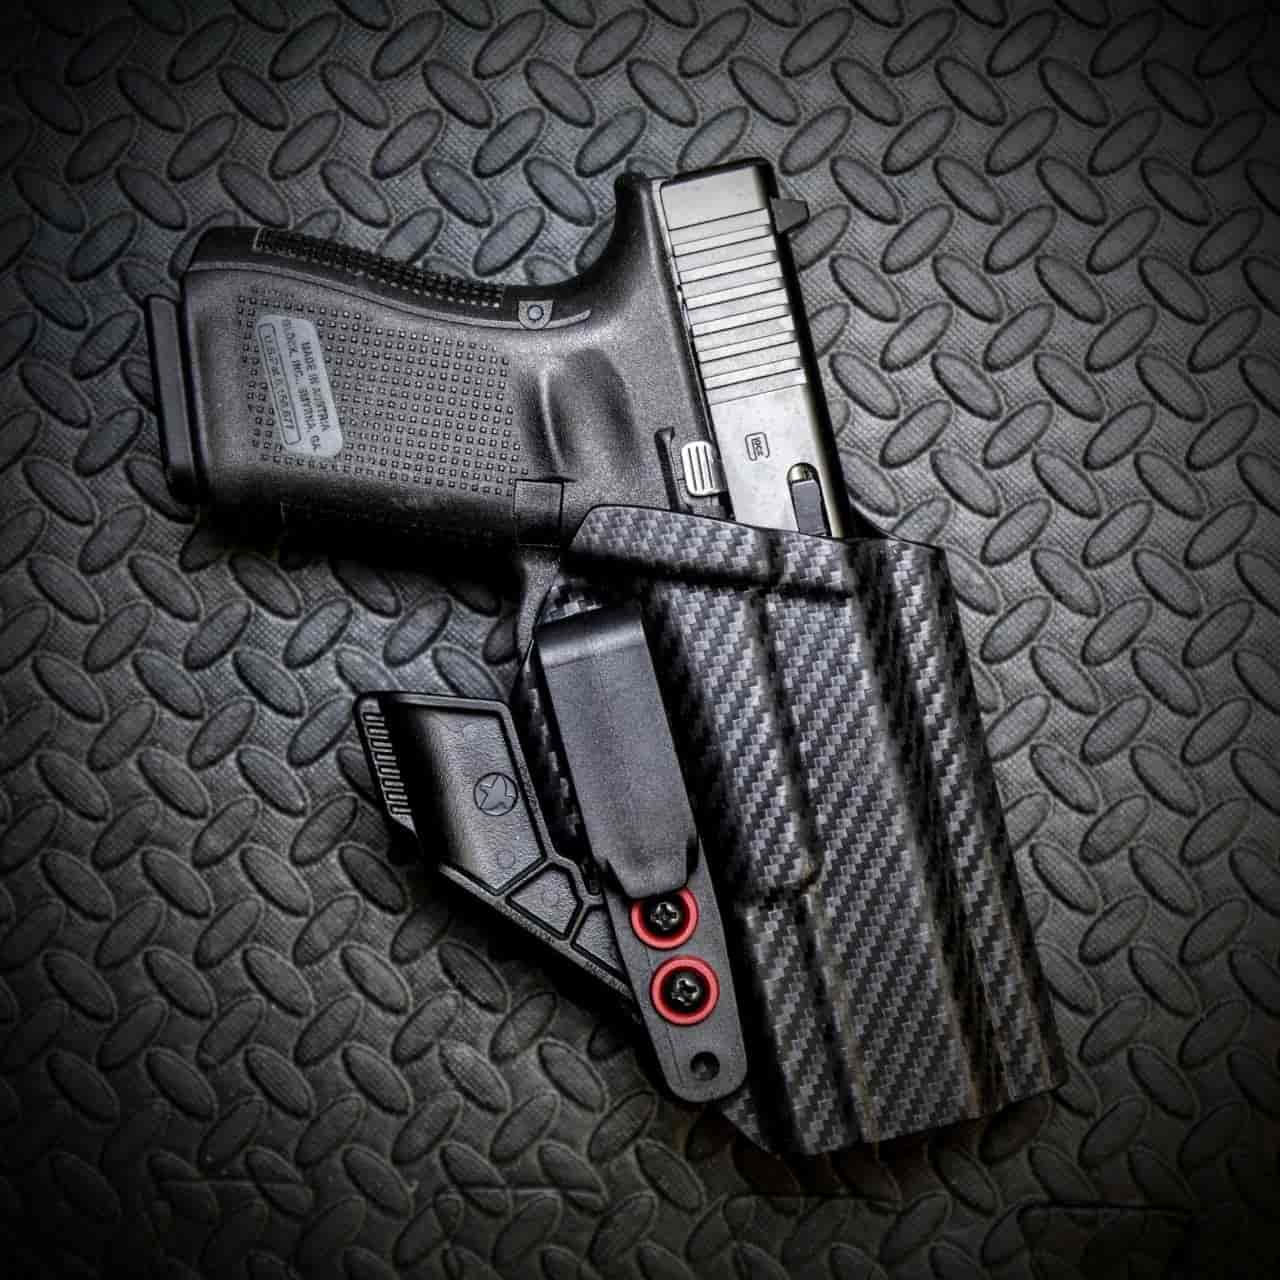 Glock 17/22/31 One Series "The Works" Kydex Holster Black Carbon Fiber (Pre-made) IWB, AIWB & OWB Kydex Holsters and Mag Pouches